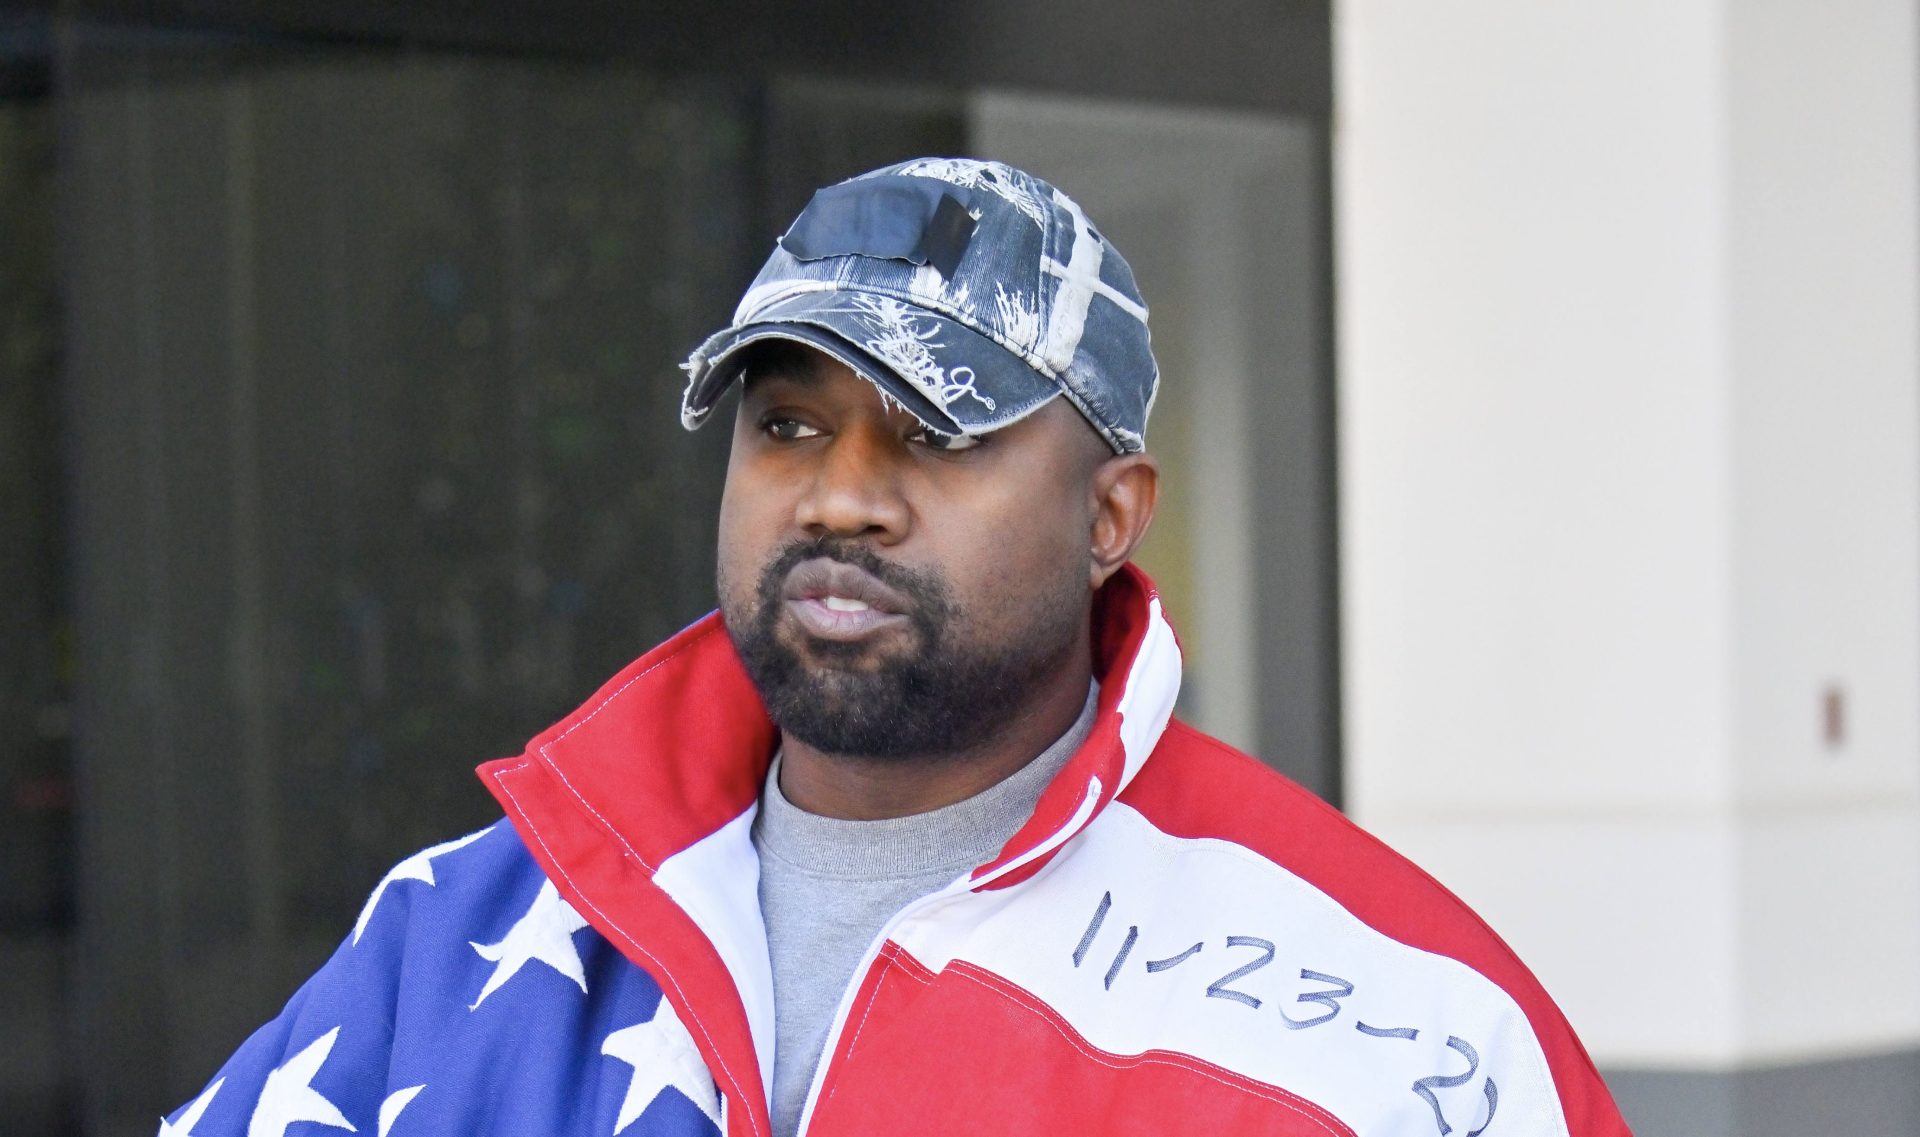 Kanye ‘Sees Good Things About Hitler’ On Heels Of North West Wearing Star Of David Shirt